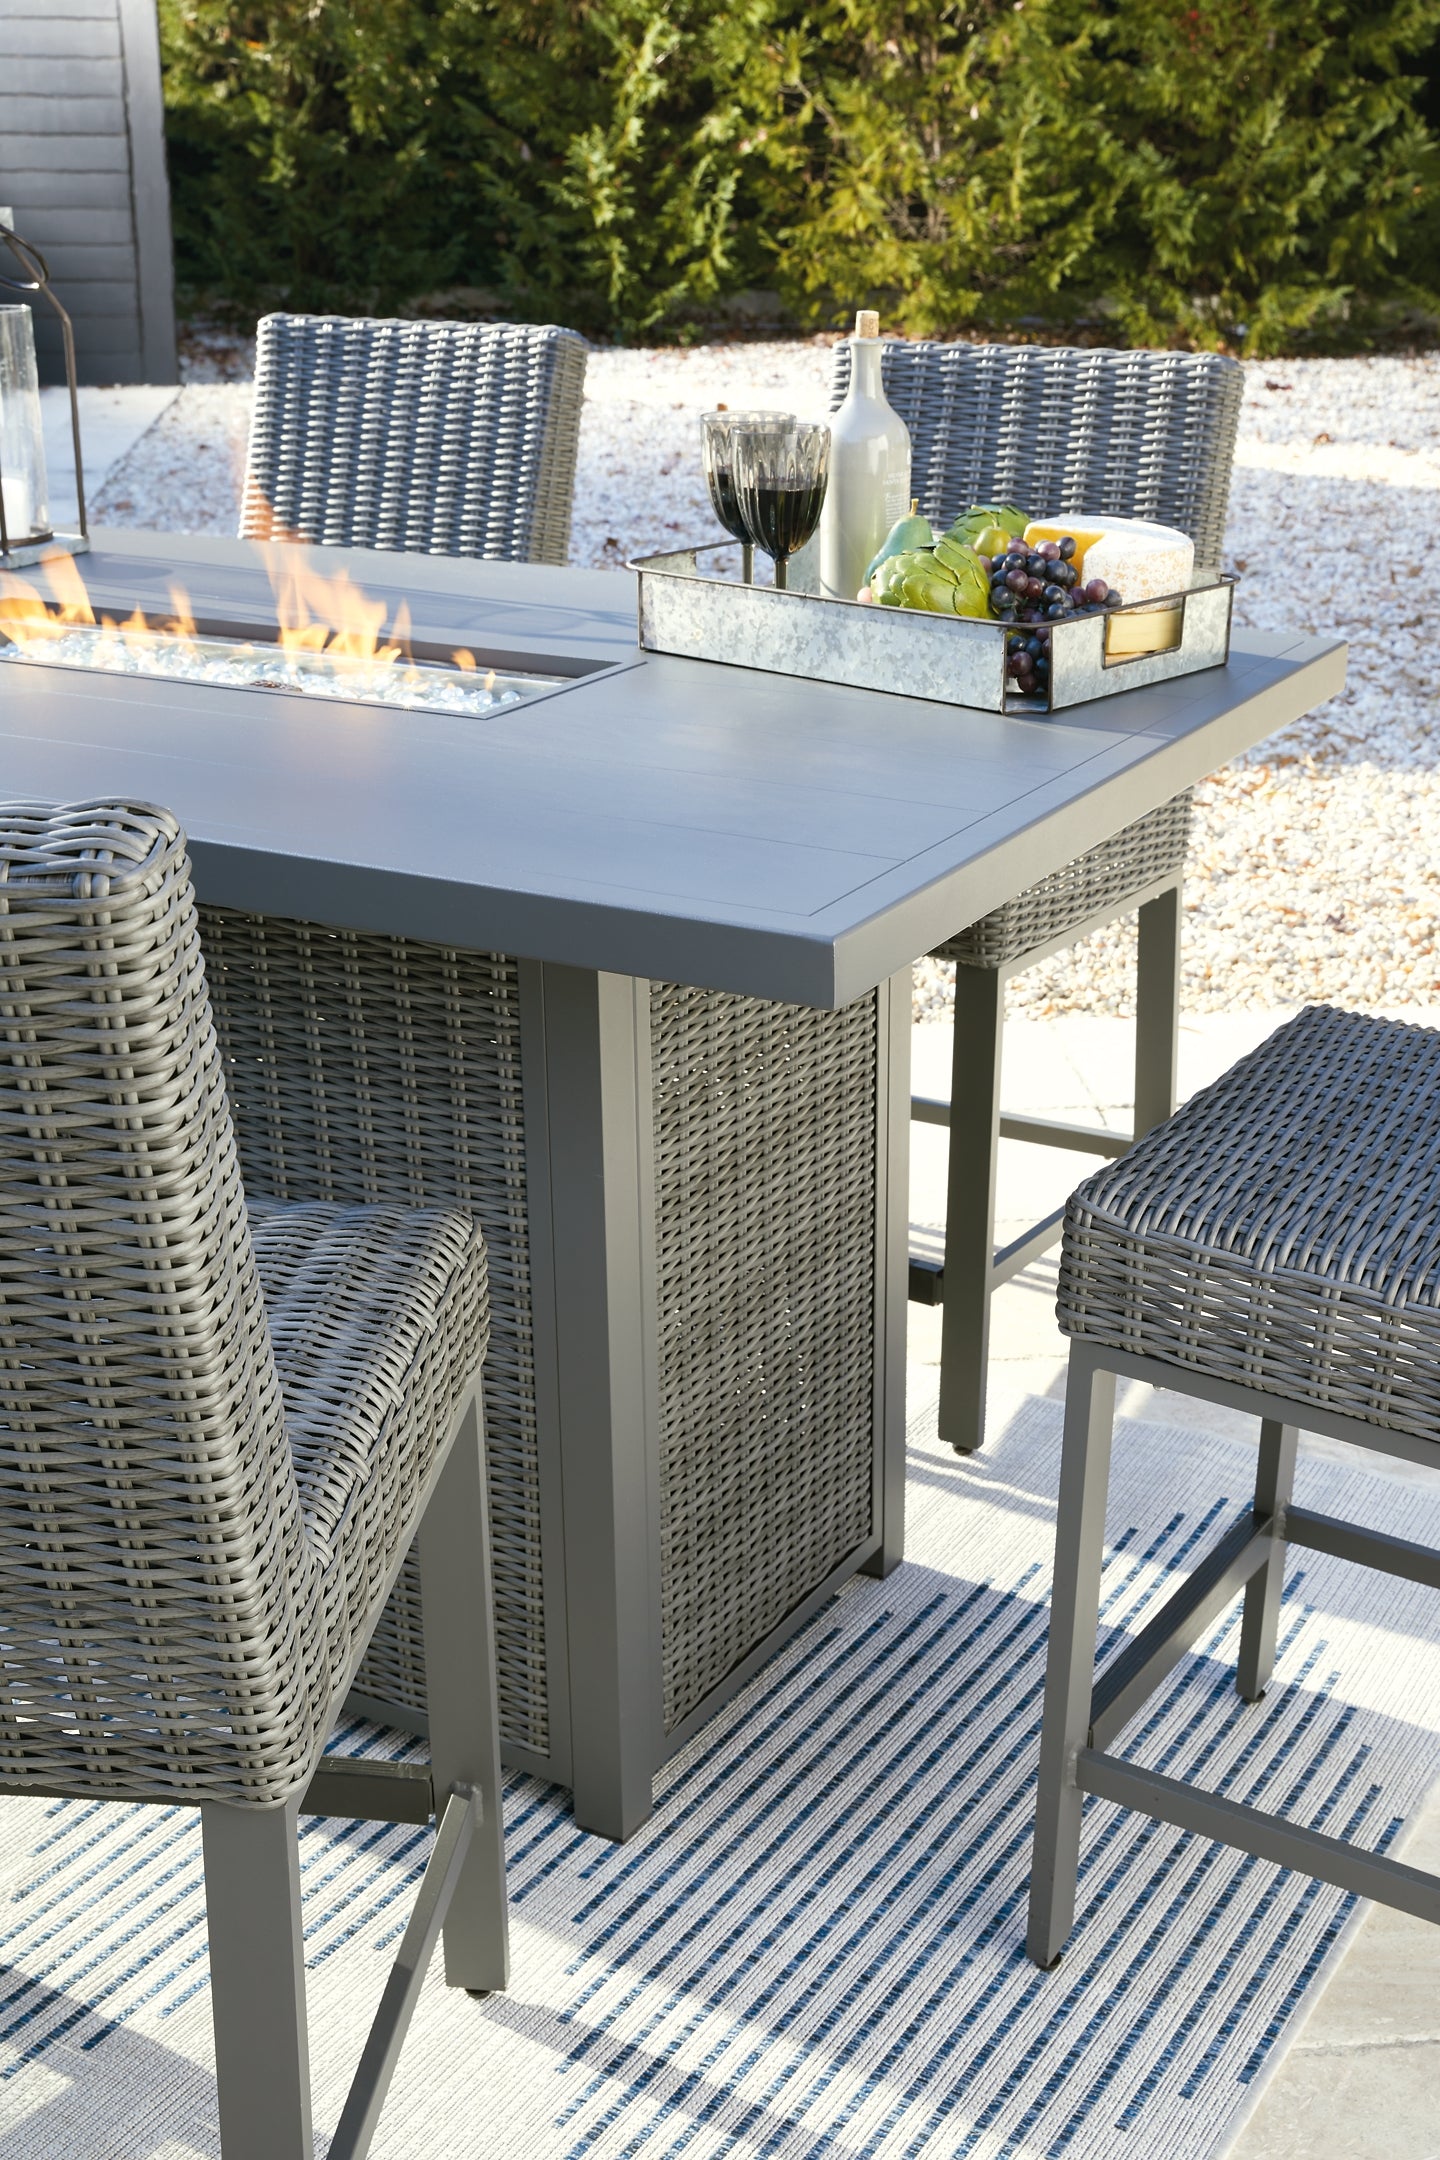 Palazzo Outdoor Counter Height Dining Table with 4 Barstools Wilson Furniture (OH)  in Bridgeport, Ohio. Serving Bridgeport, Yorkville, Bellaire, & Avondale